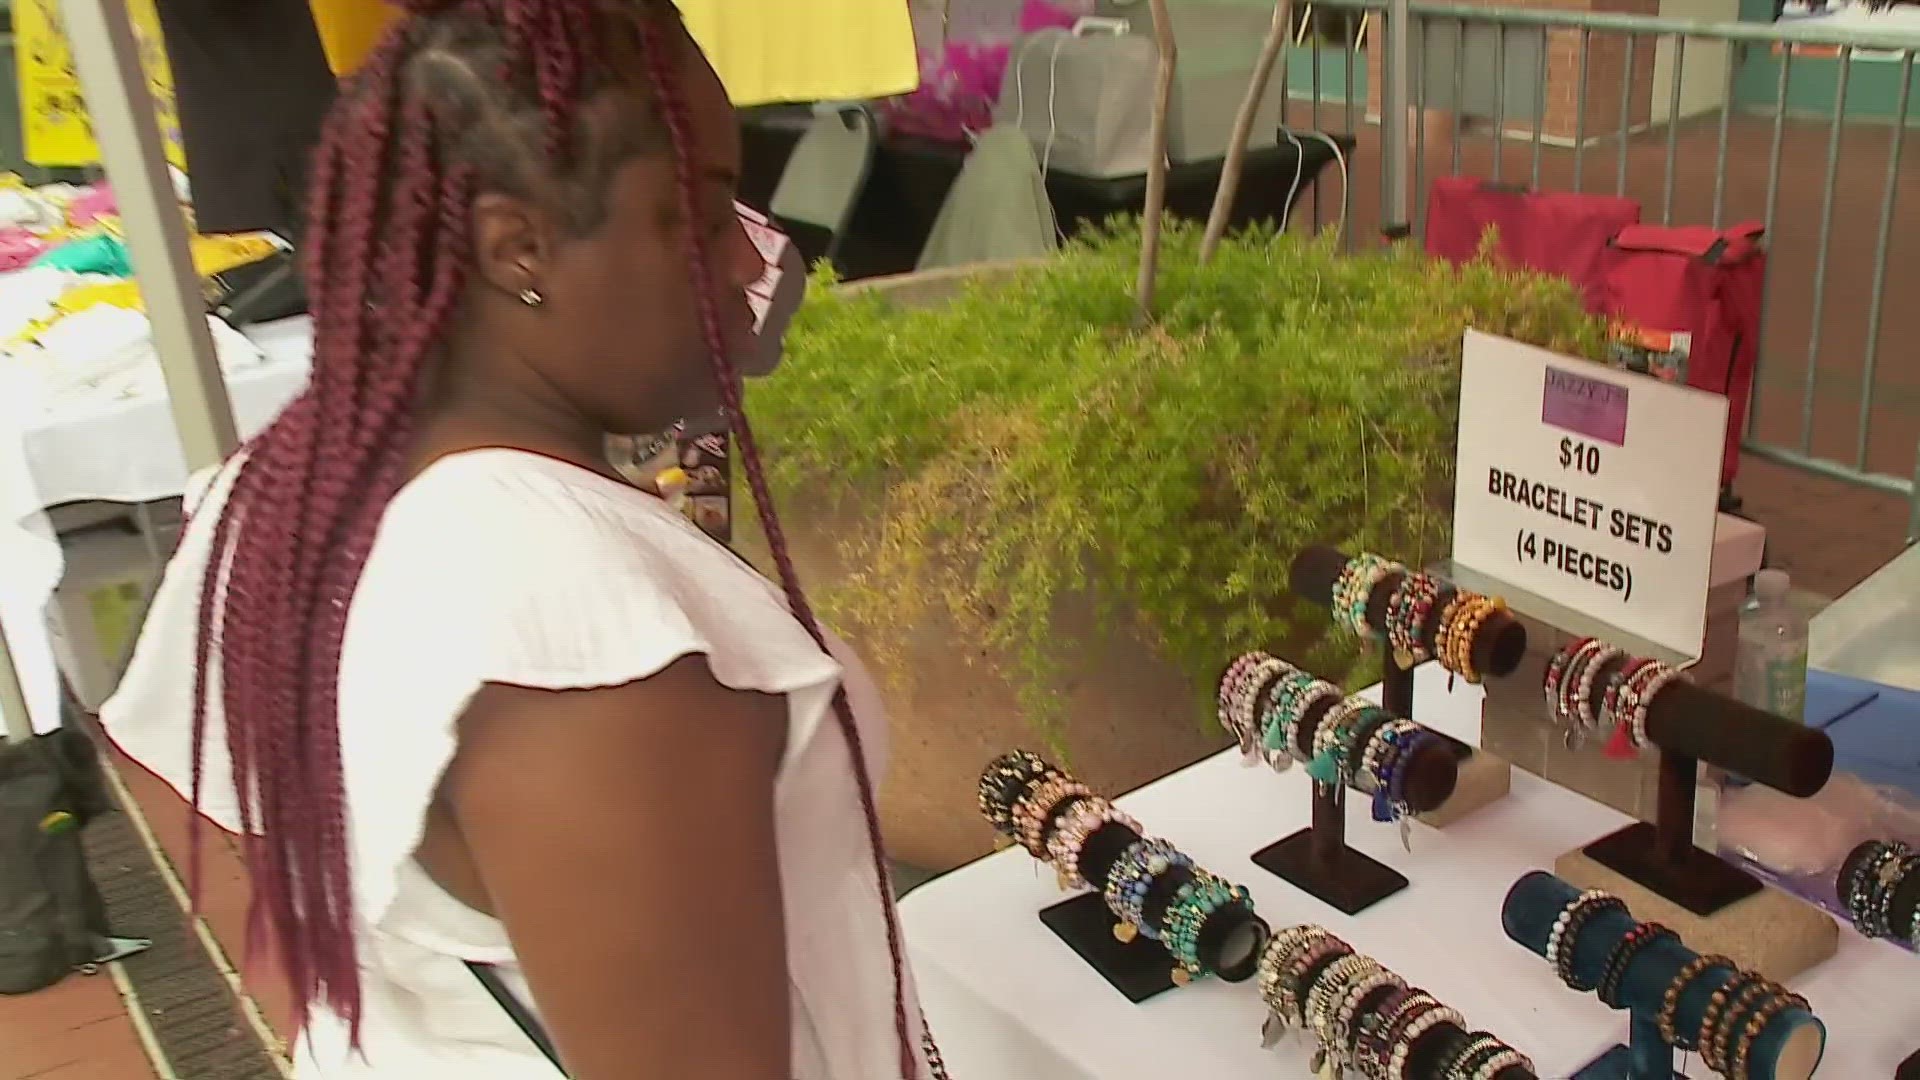 Event gives vendors affordable access to Essence Fest crowds